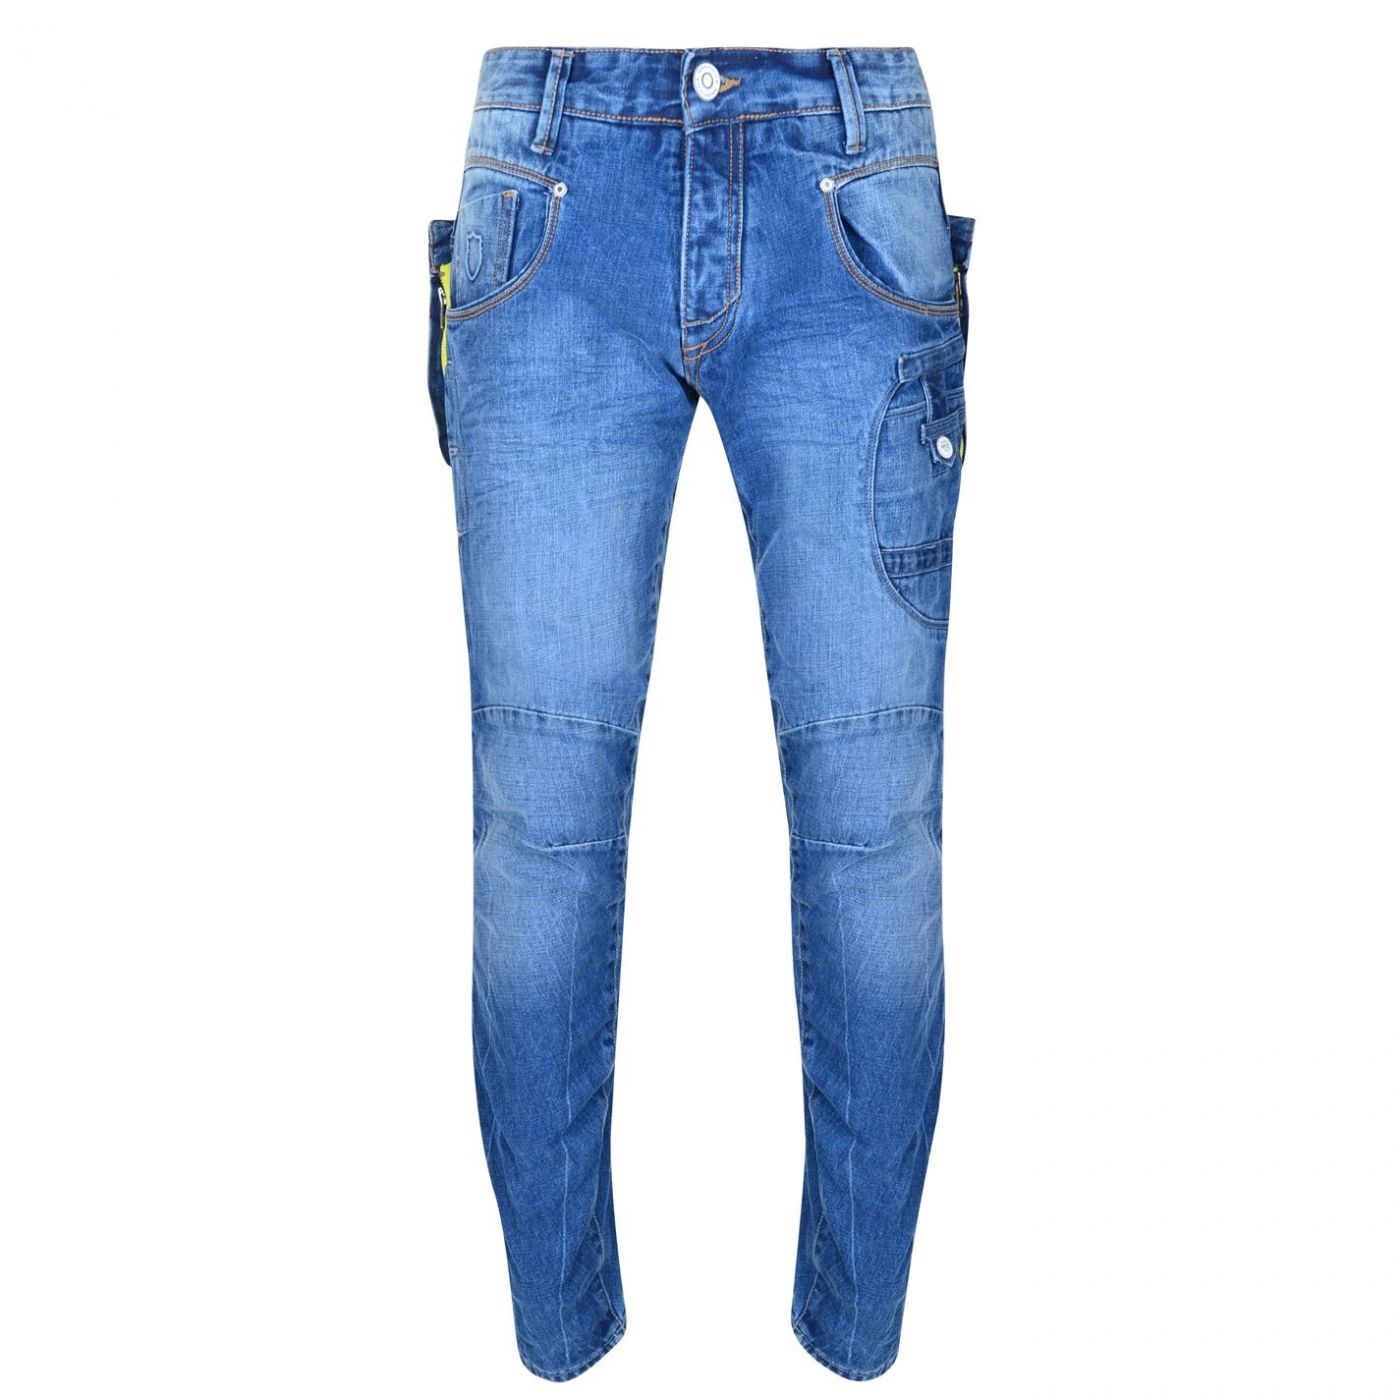 883 police jeans